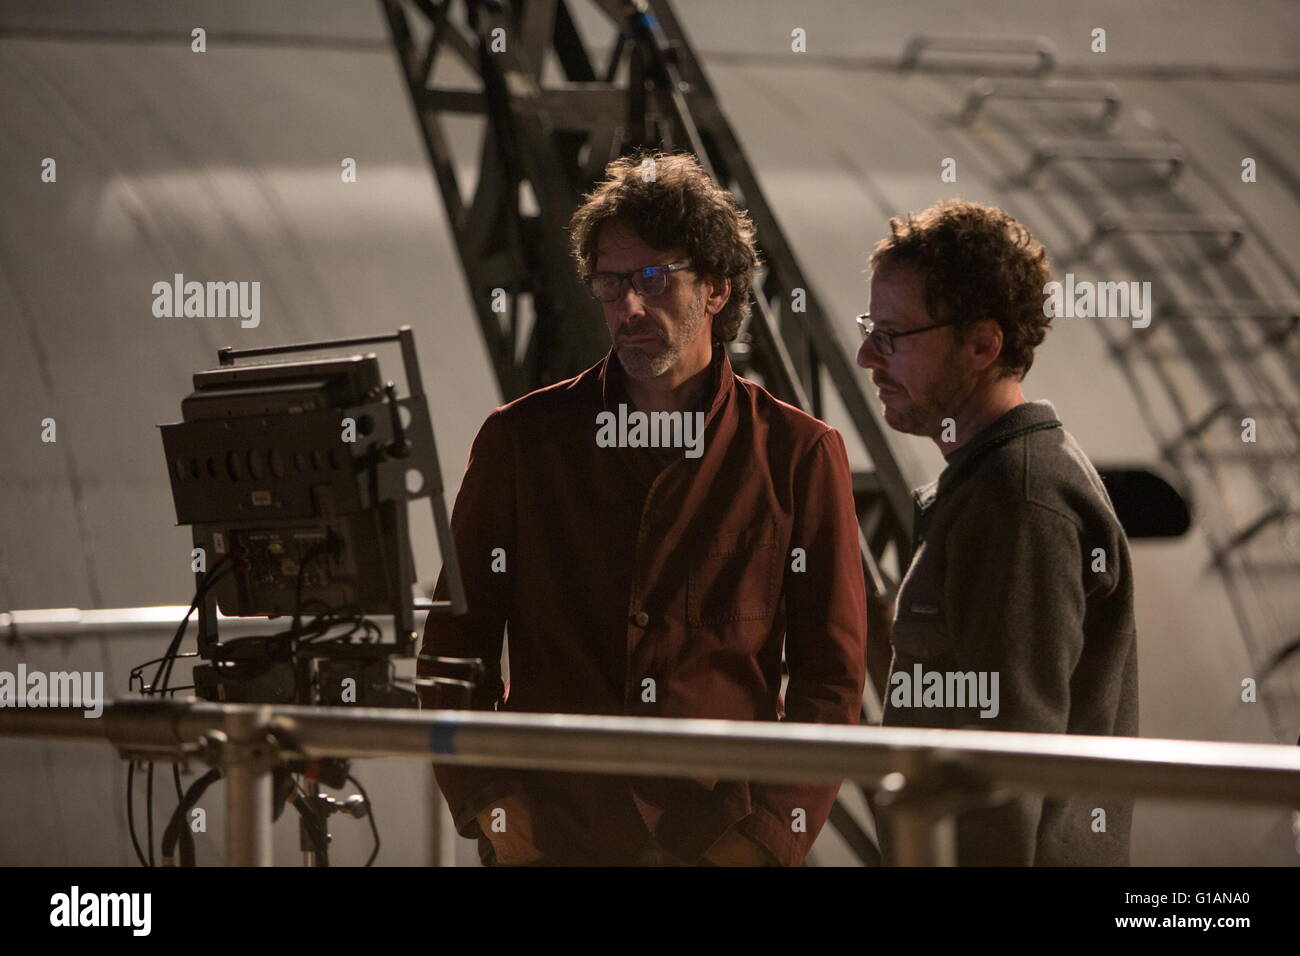 RELEASE DATE: February 5, 2016 TITLE: Hail, Caesar! STUDIO: Universal Pictures DIRECTOR: Ethan Coen, Joel Coen PLOT: A Hollywood fixer in the 1950s works to keep the studio's stars in line PICTURED: Ethan Coen, Joel Coen on set (Credit: c Universal Pictures/Entertainment Pictures/) Stock Photo